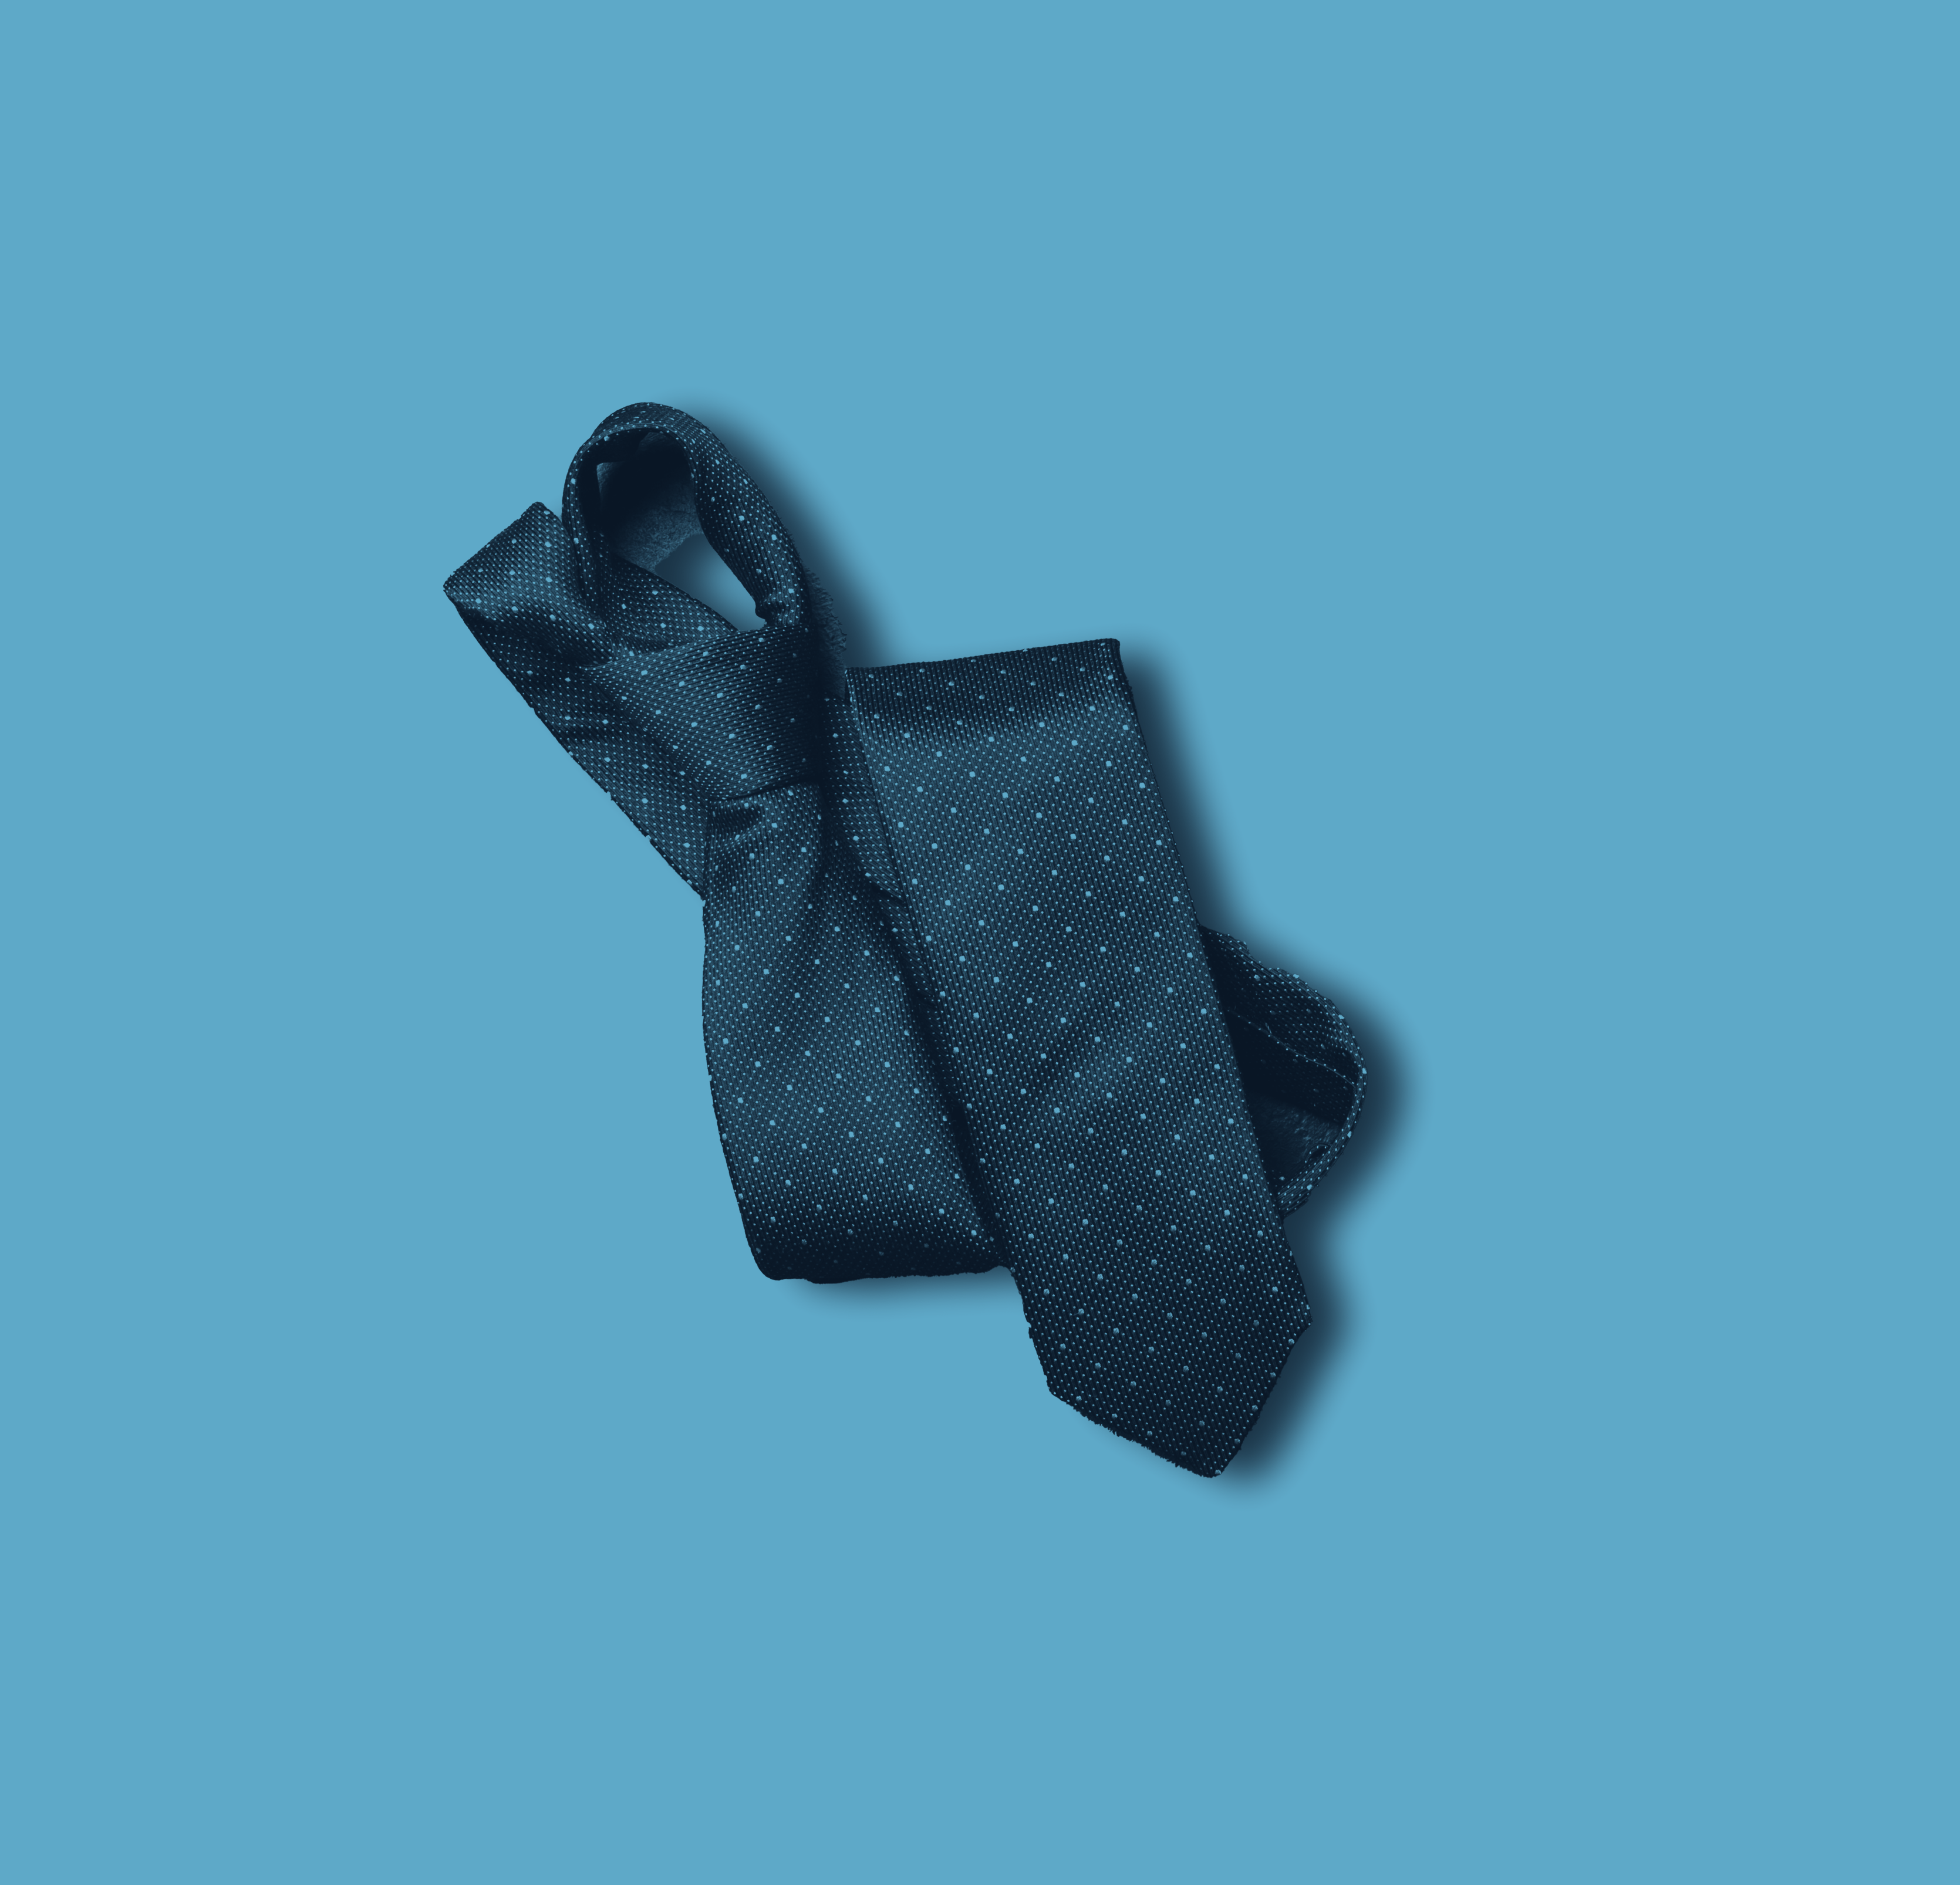 Image of a bunched up necktie.